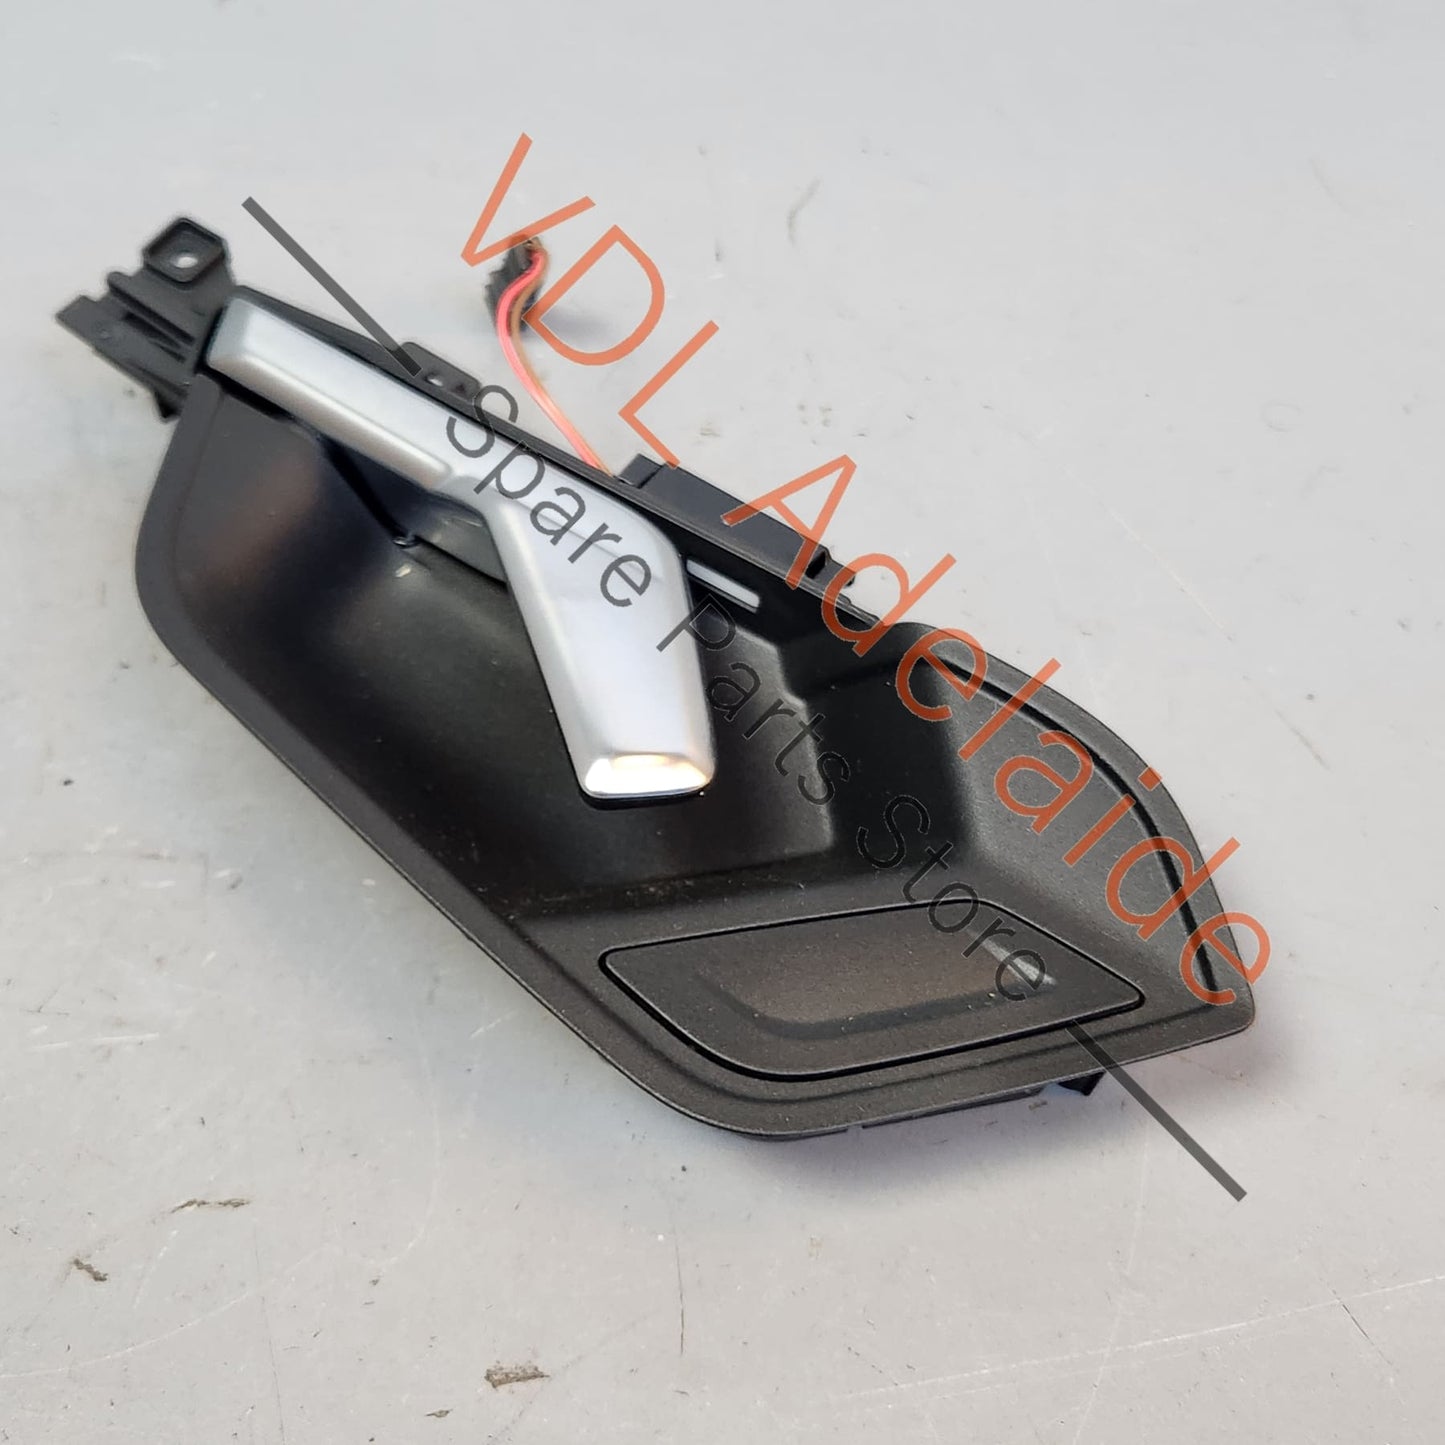 83A837019G 83A837019G4PK 83A837019F  Audi Q3 RSQ3 F3 Left Side Interior Door Pull Release Handle 83A837019G 4PK